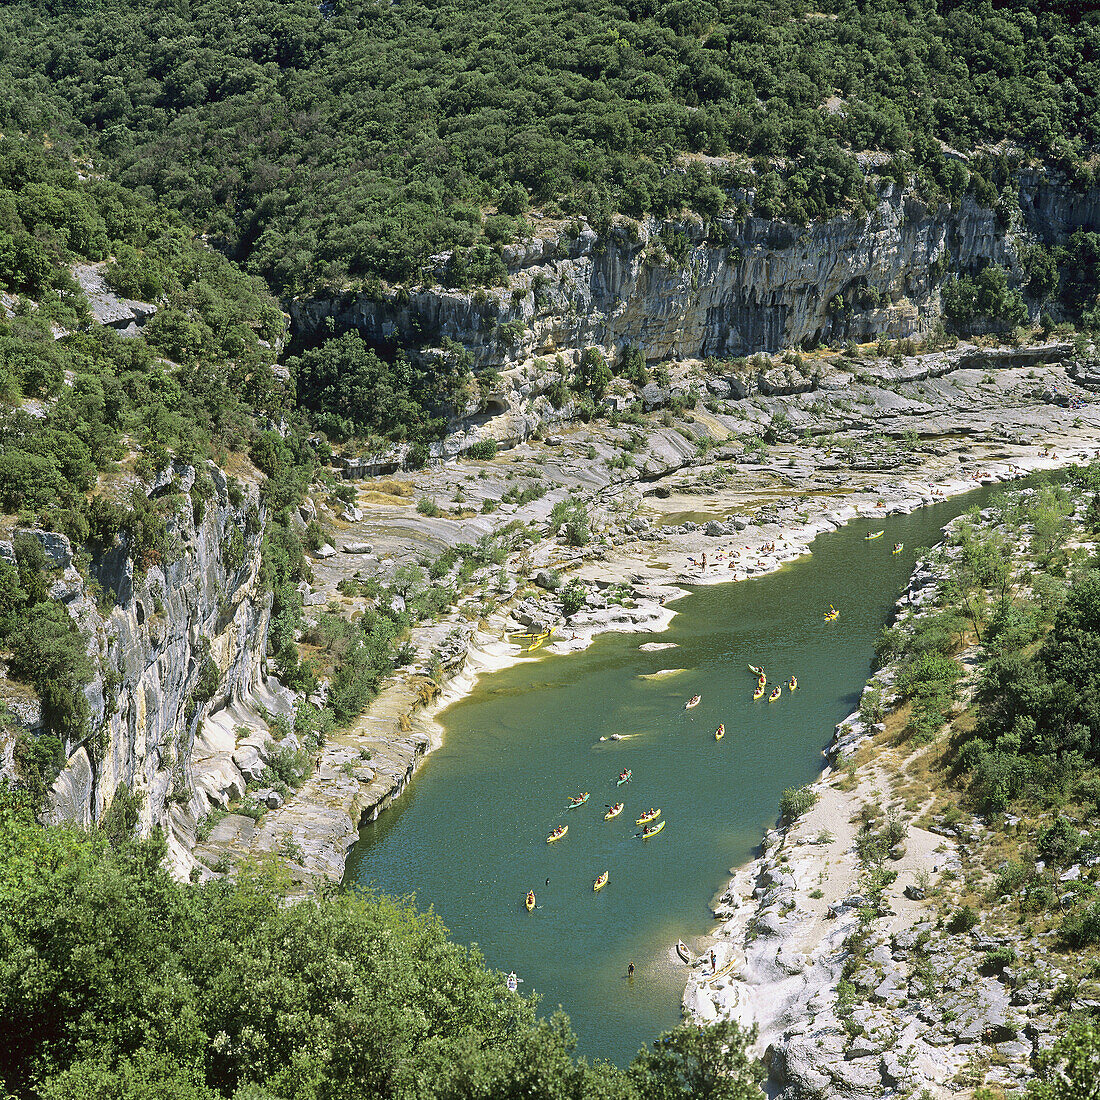 abrupt, Ardèche, attraction, canoe, canyon, cliff, Color image, contemporary, corniche, day, destination, discovery, ecosystem, Europe, forest, formation, France, French, geological, geology, gorge, green, Haute, landmark, Landscape, location, majestic, m